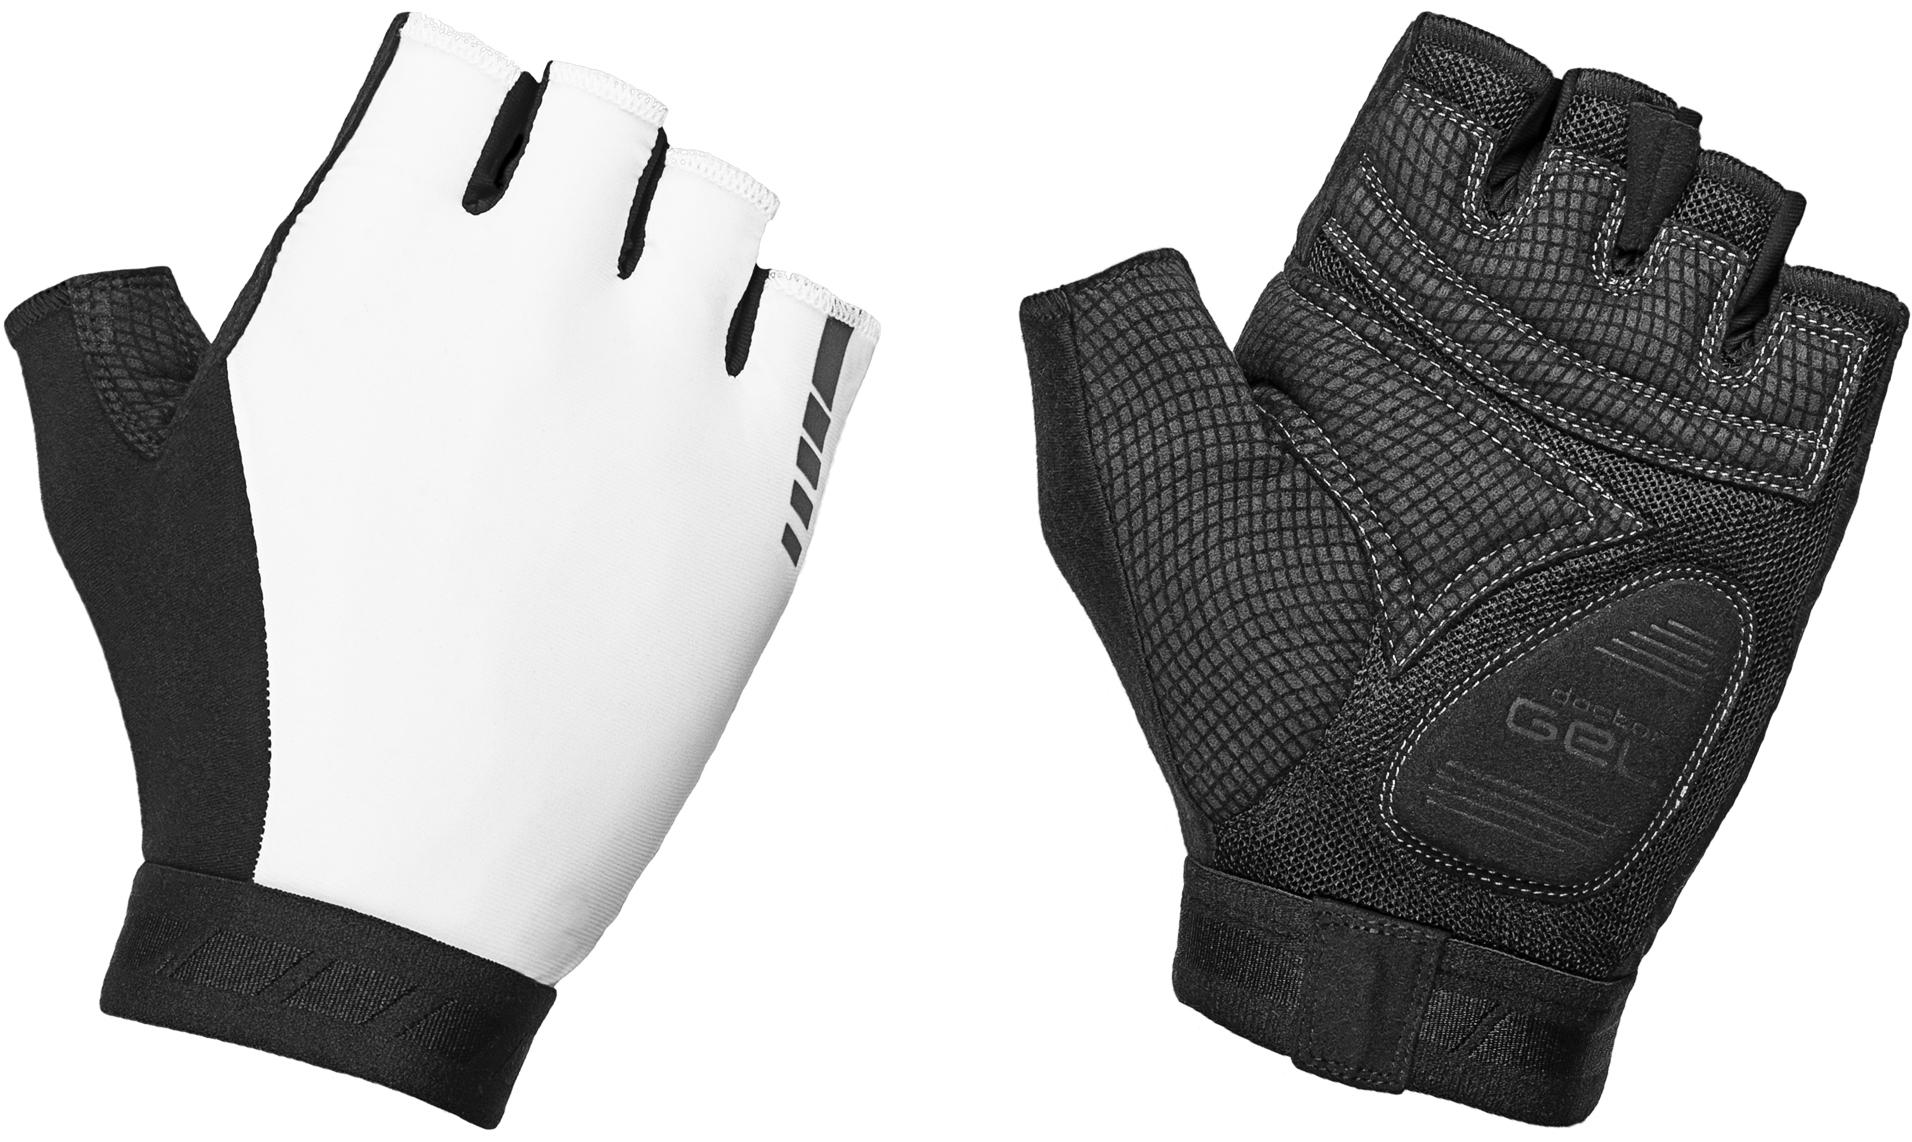 Gripgrab Worldcup Short Finger Padded Cycling Gloves - White